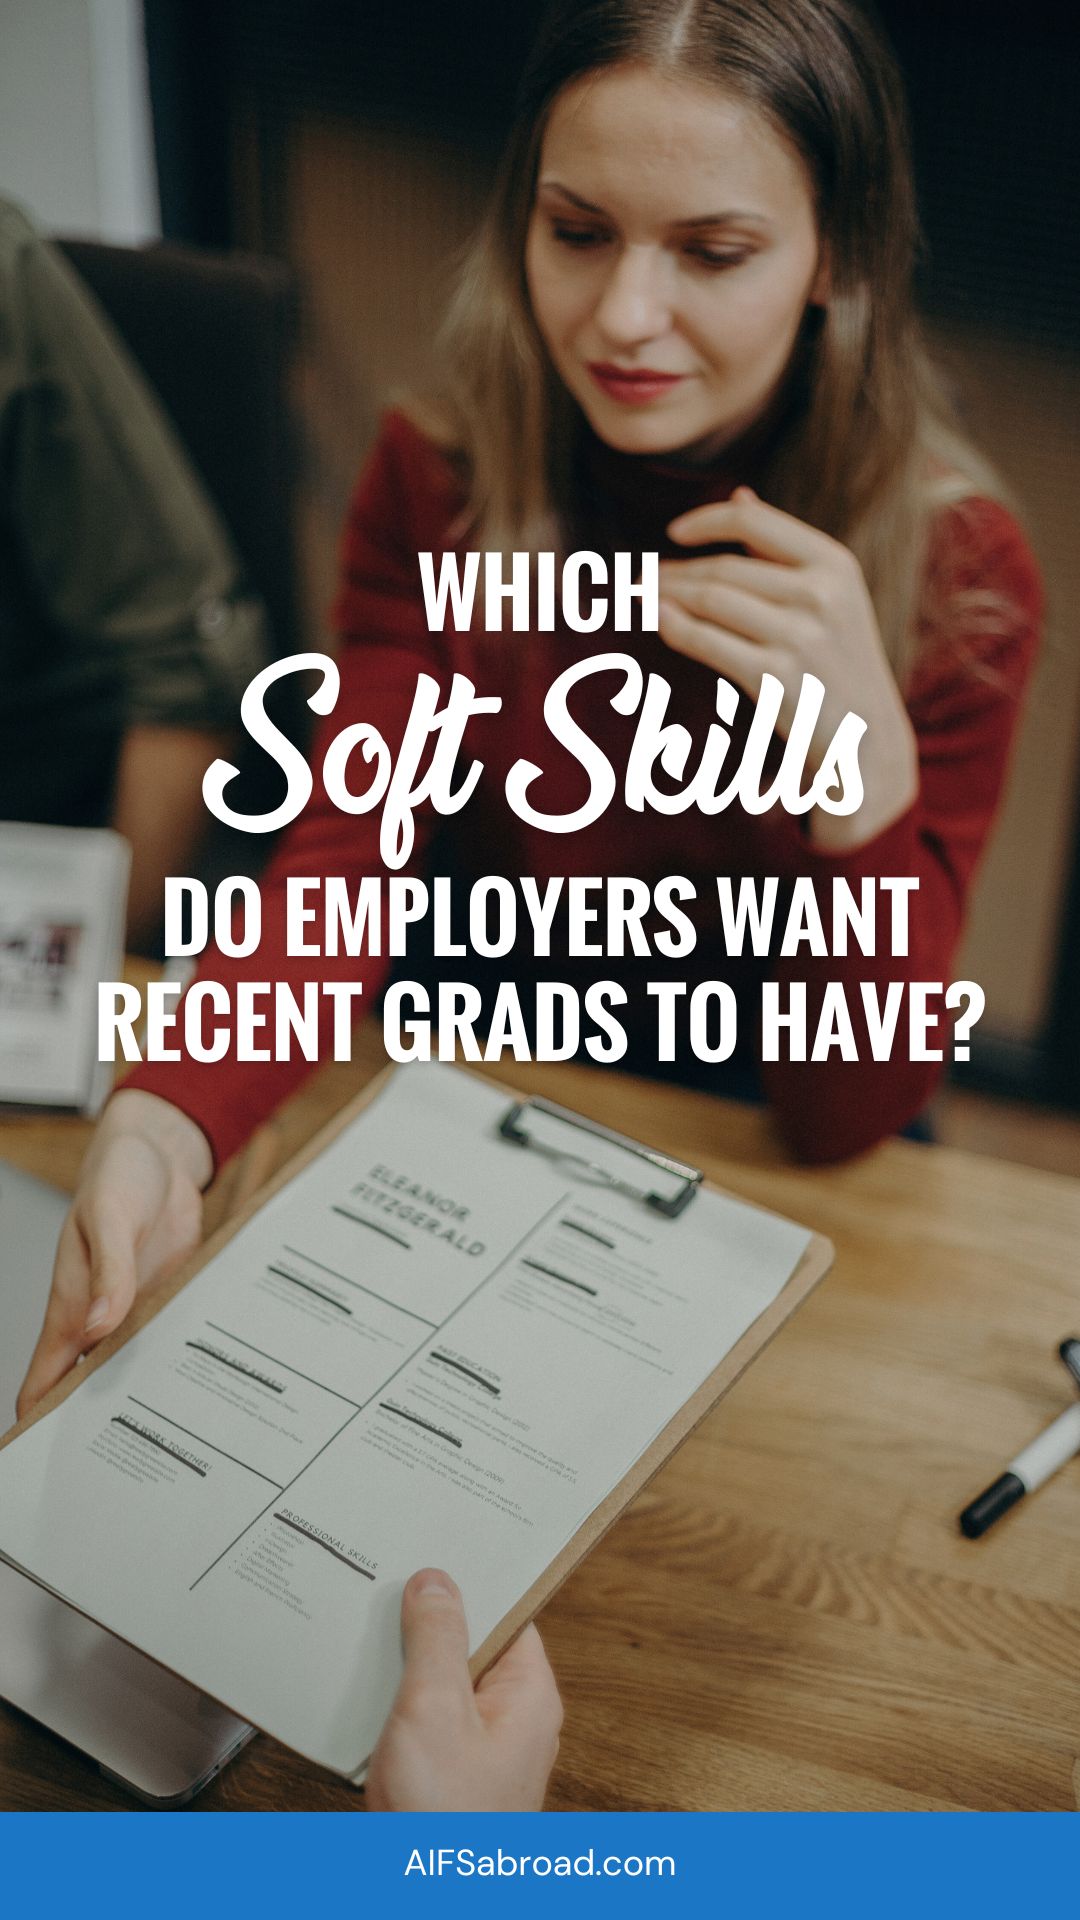 Pin image: Young woman with resume with text overlay "Which Soft skills do Employers Want Recent Grads to Have?"